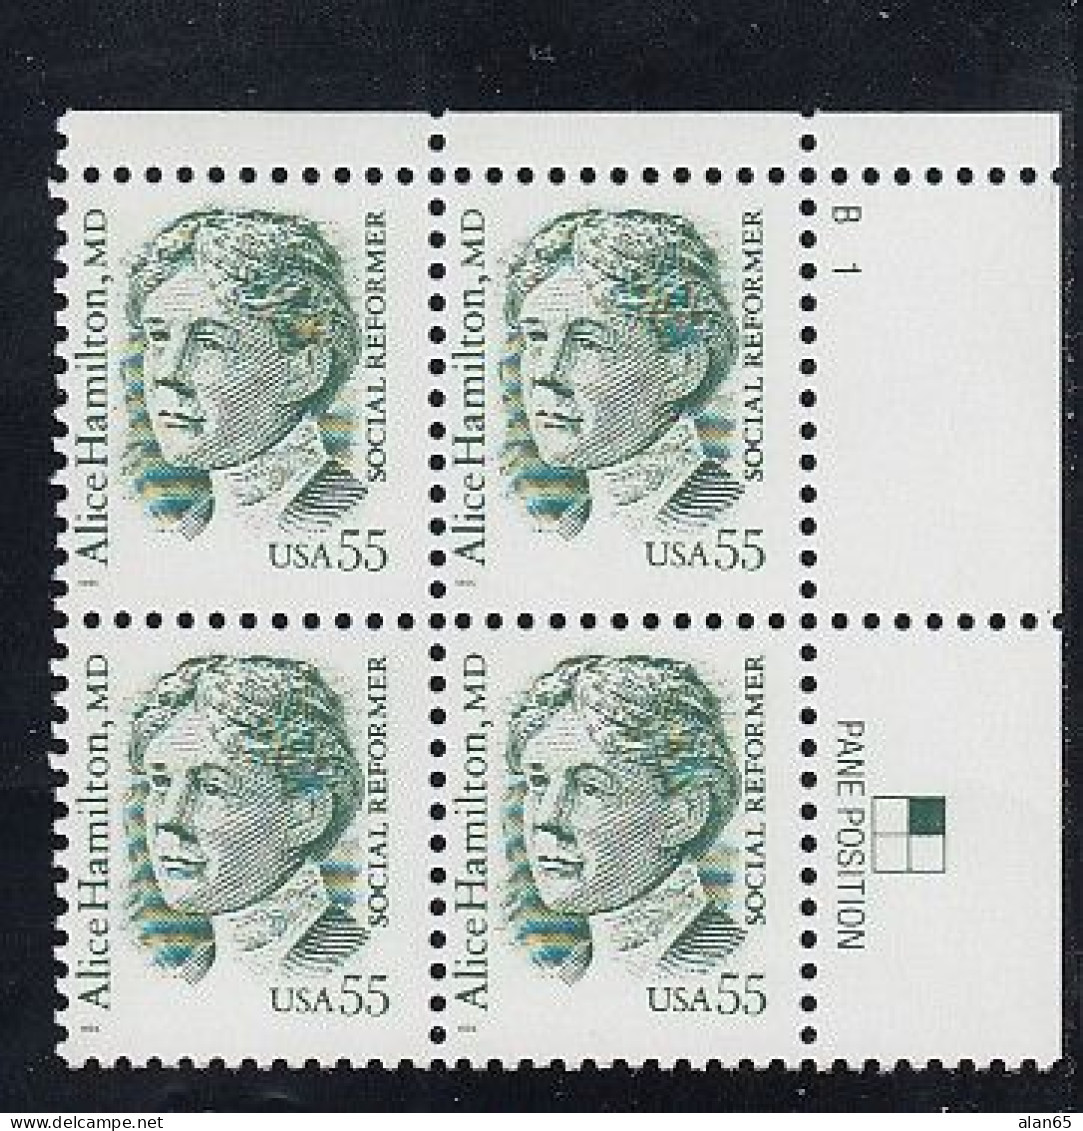 Sc#2940, Alice Hamilton MD Great American Series 1999 Issue 55-cent Stamp Plate # Block Of 4 - Números De Placas